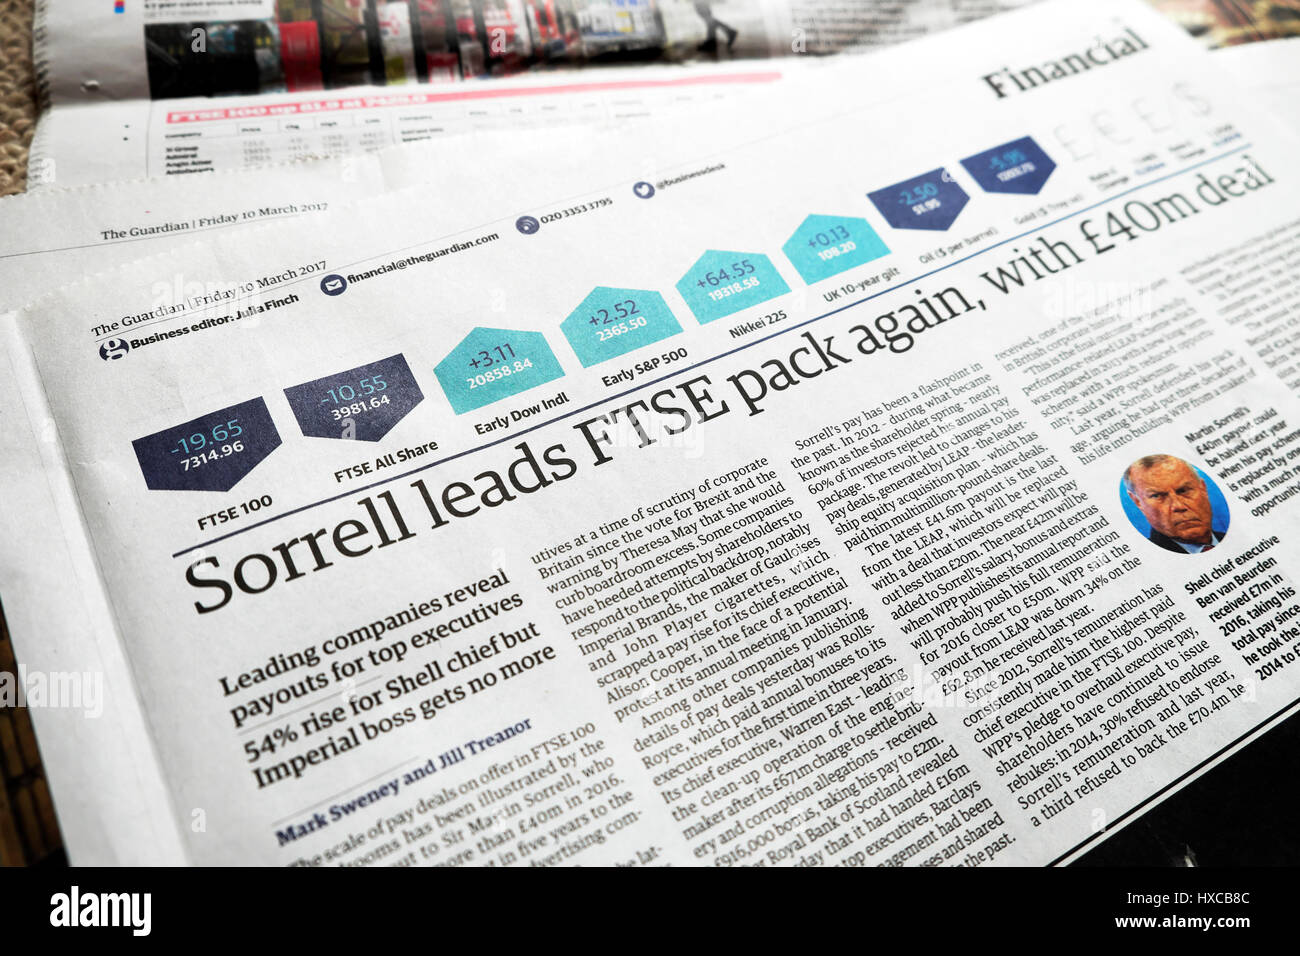 'Sorrell leads FTSE pack again, with £40m deal' Financial section article in Guardian newspaper 10 March 2017 London  UK Stock Photo